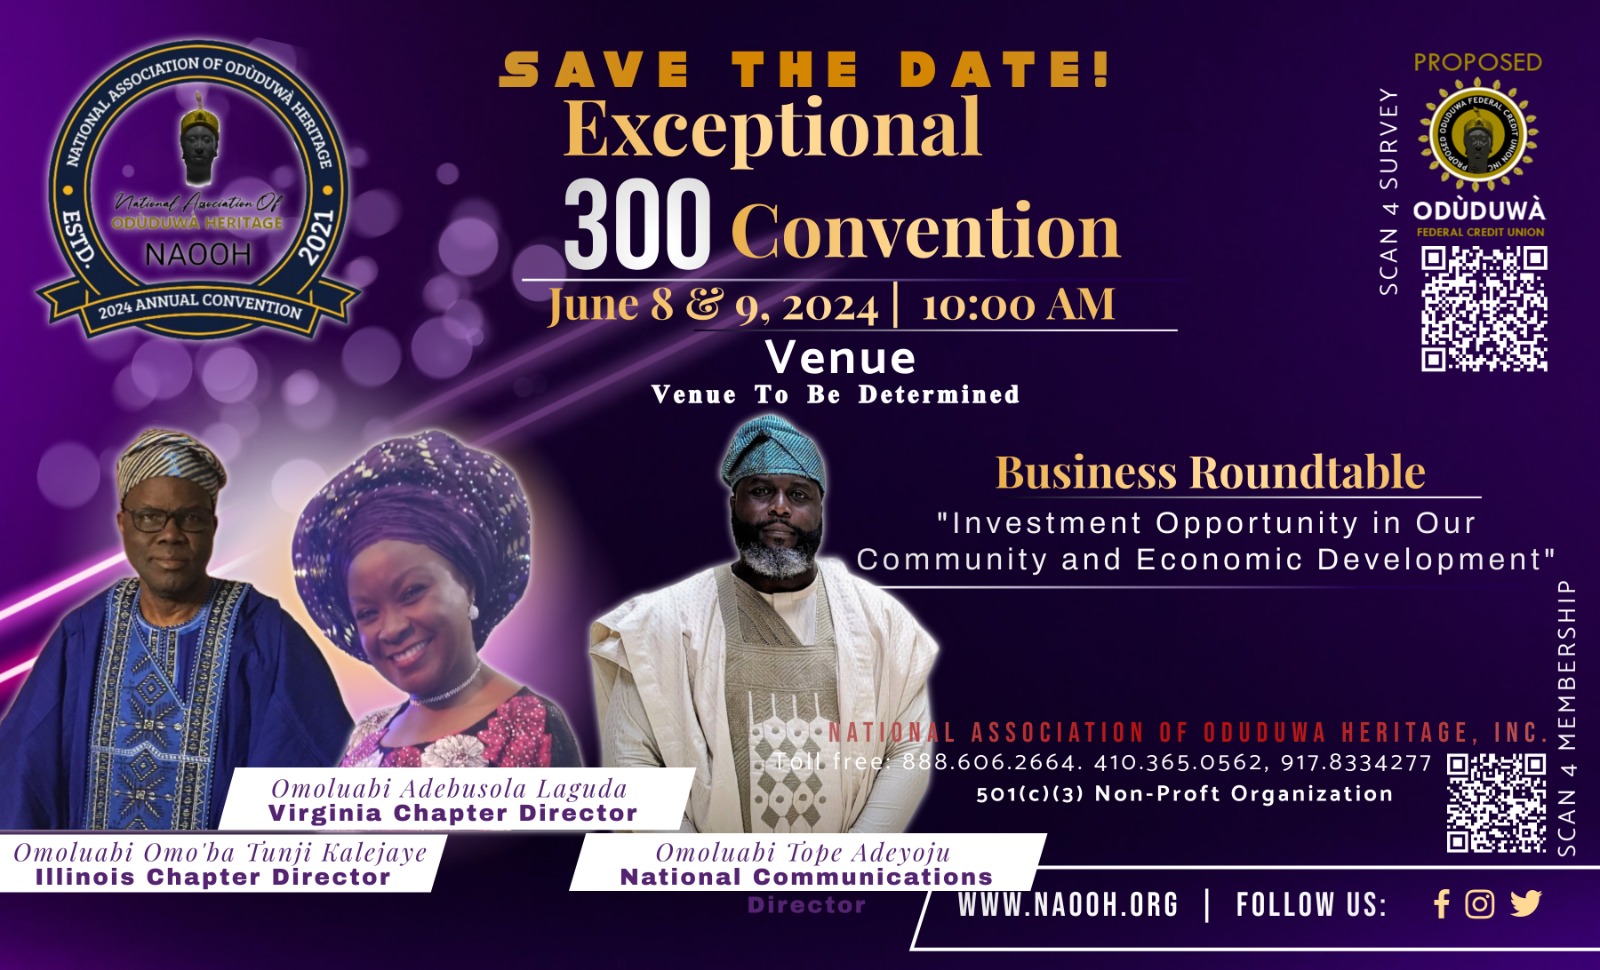 NAOOH'S 2024 NATIONAL CONVENTION - Business Roundtable